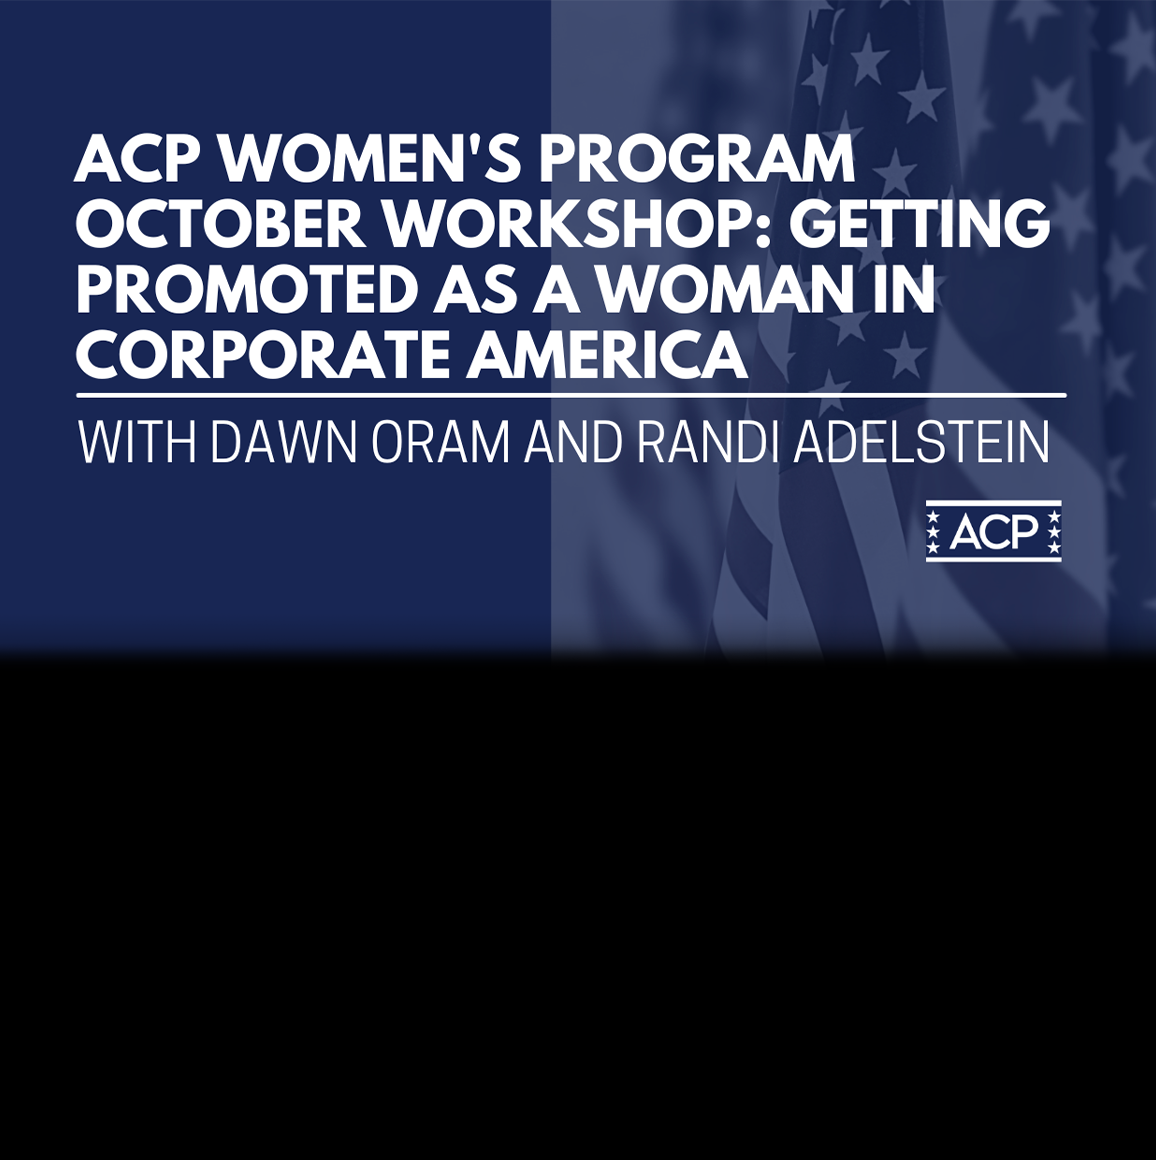 ACP Women's Program October Workshop: Getting Promoted as a Woman in Corporate America